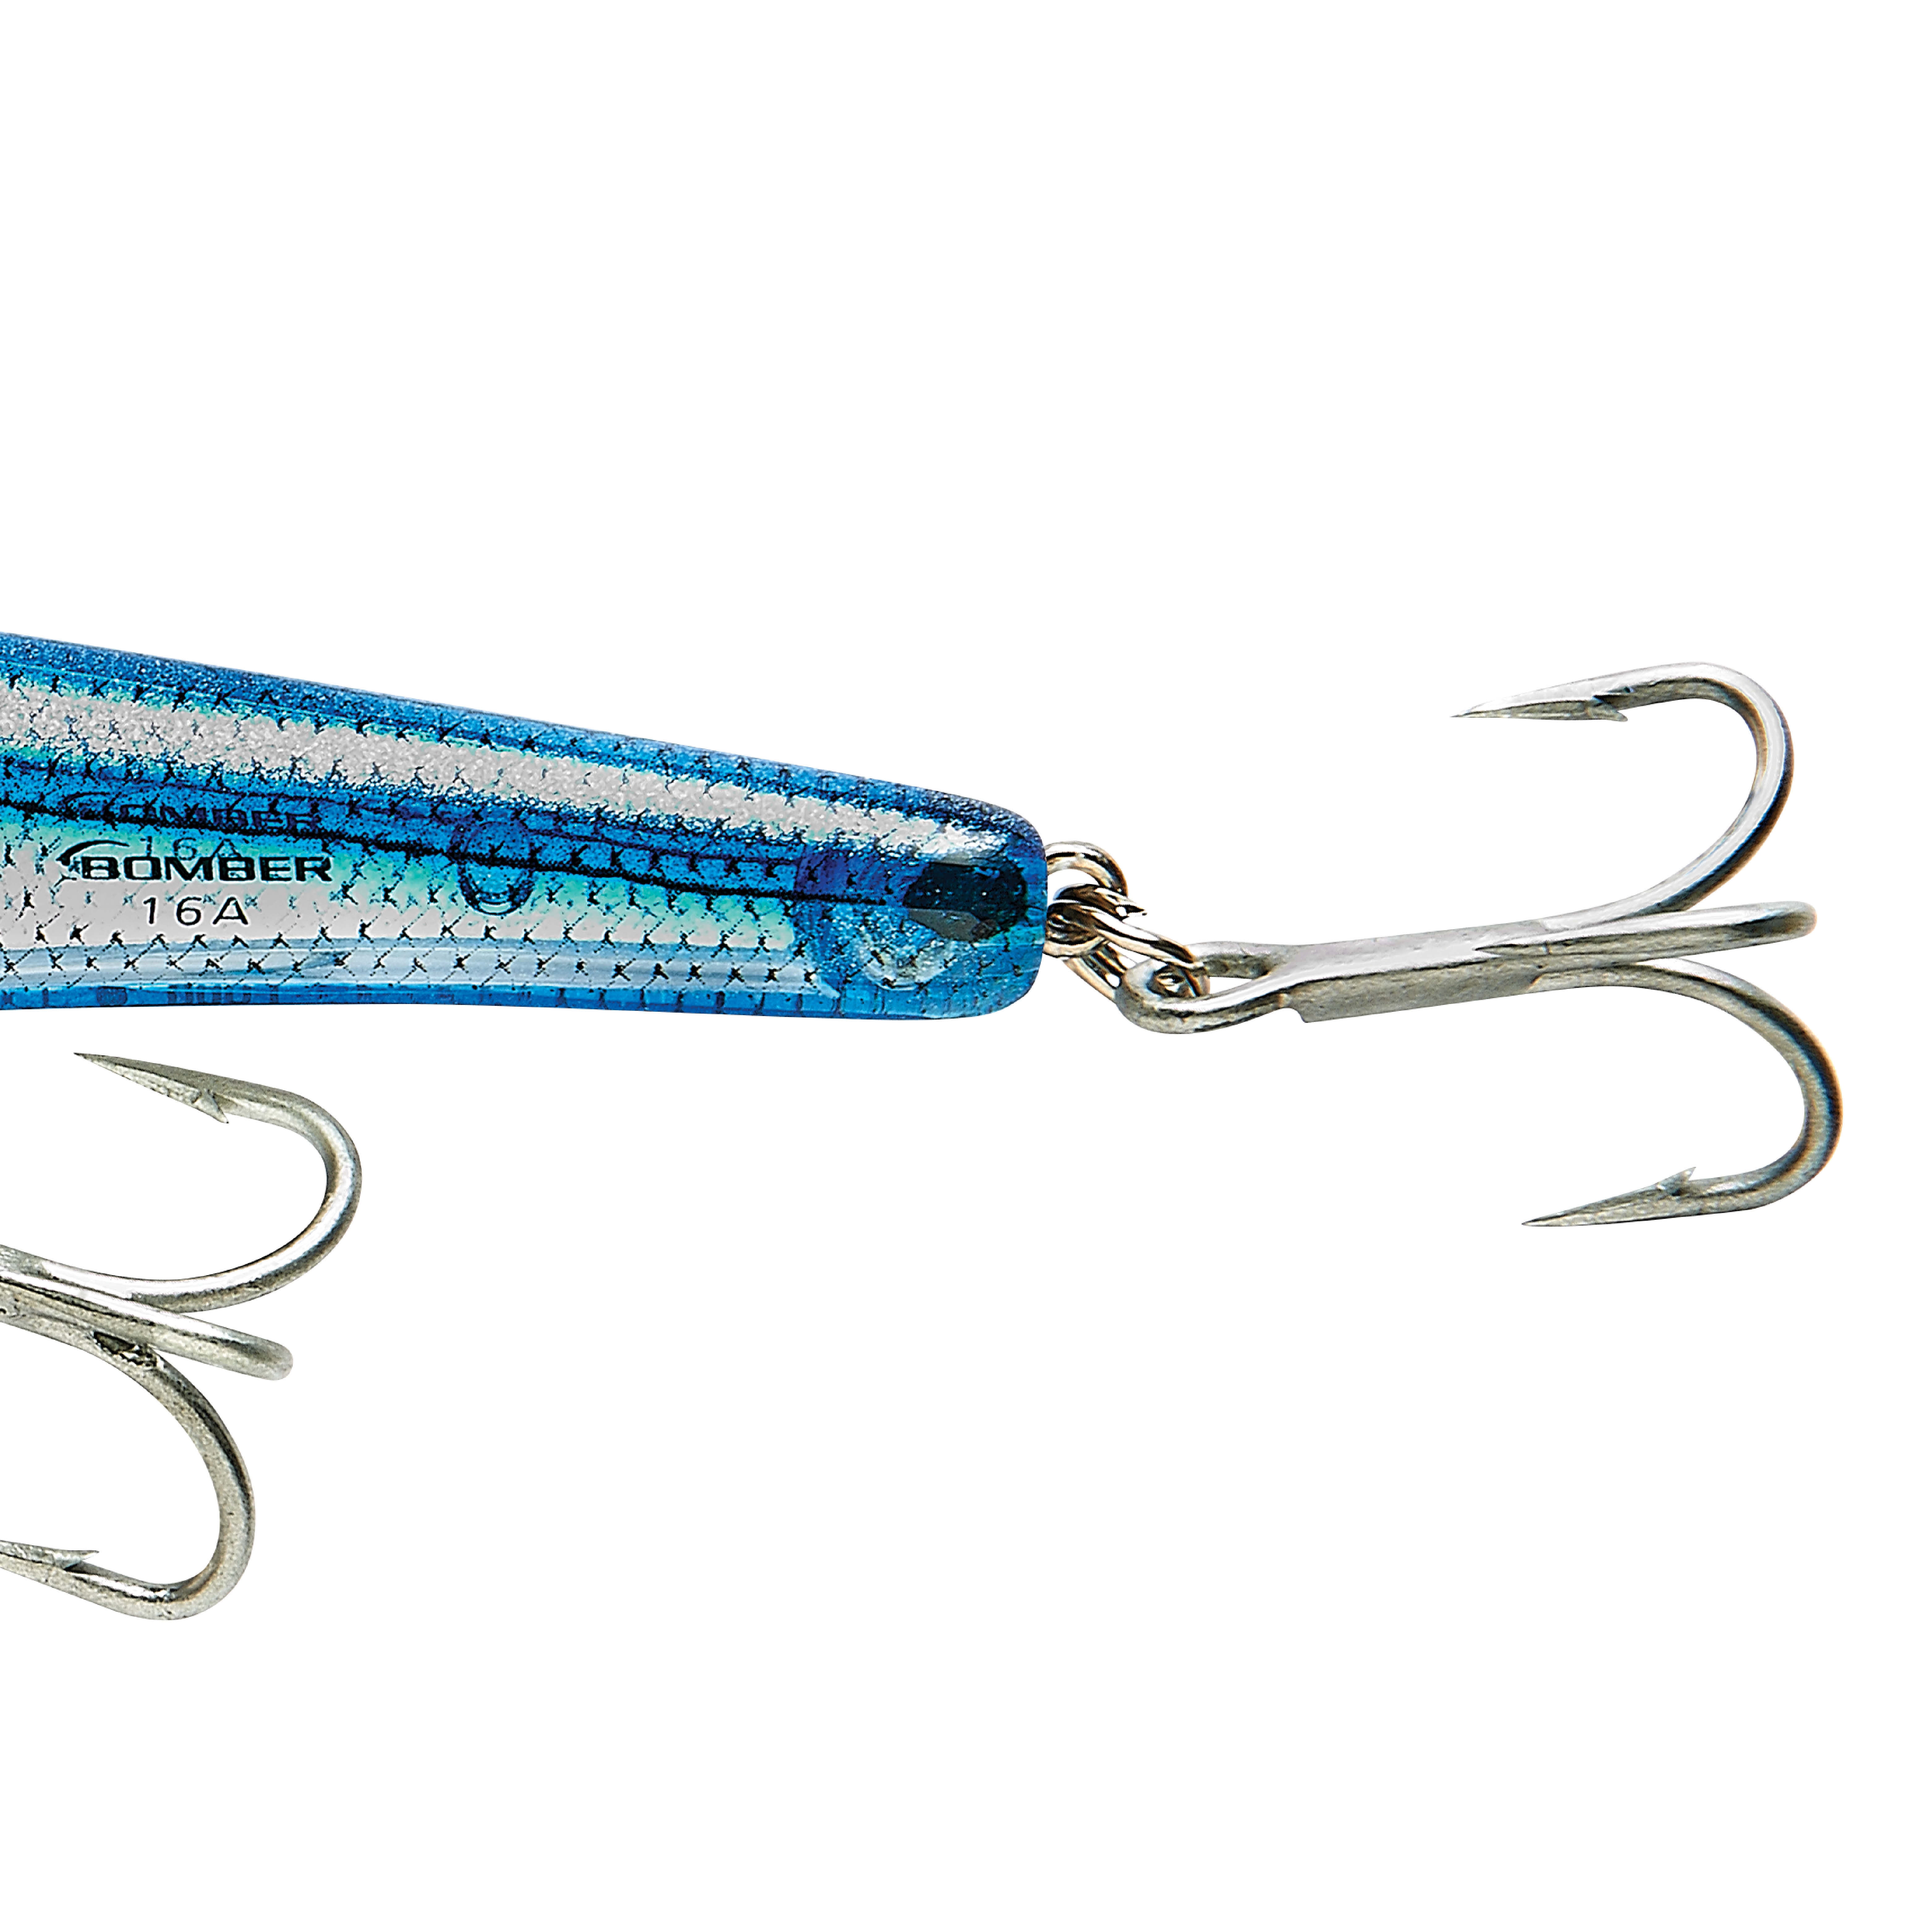 Bomber A-Salt BSW146AXSICH Silver Chartreuse Fishing Lure